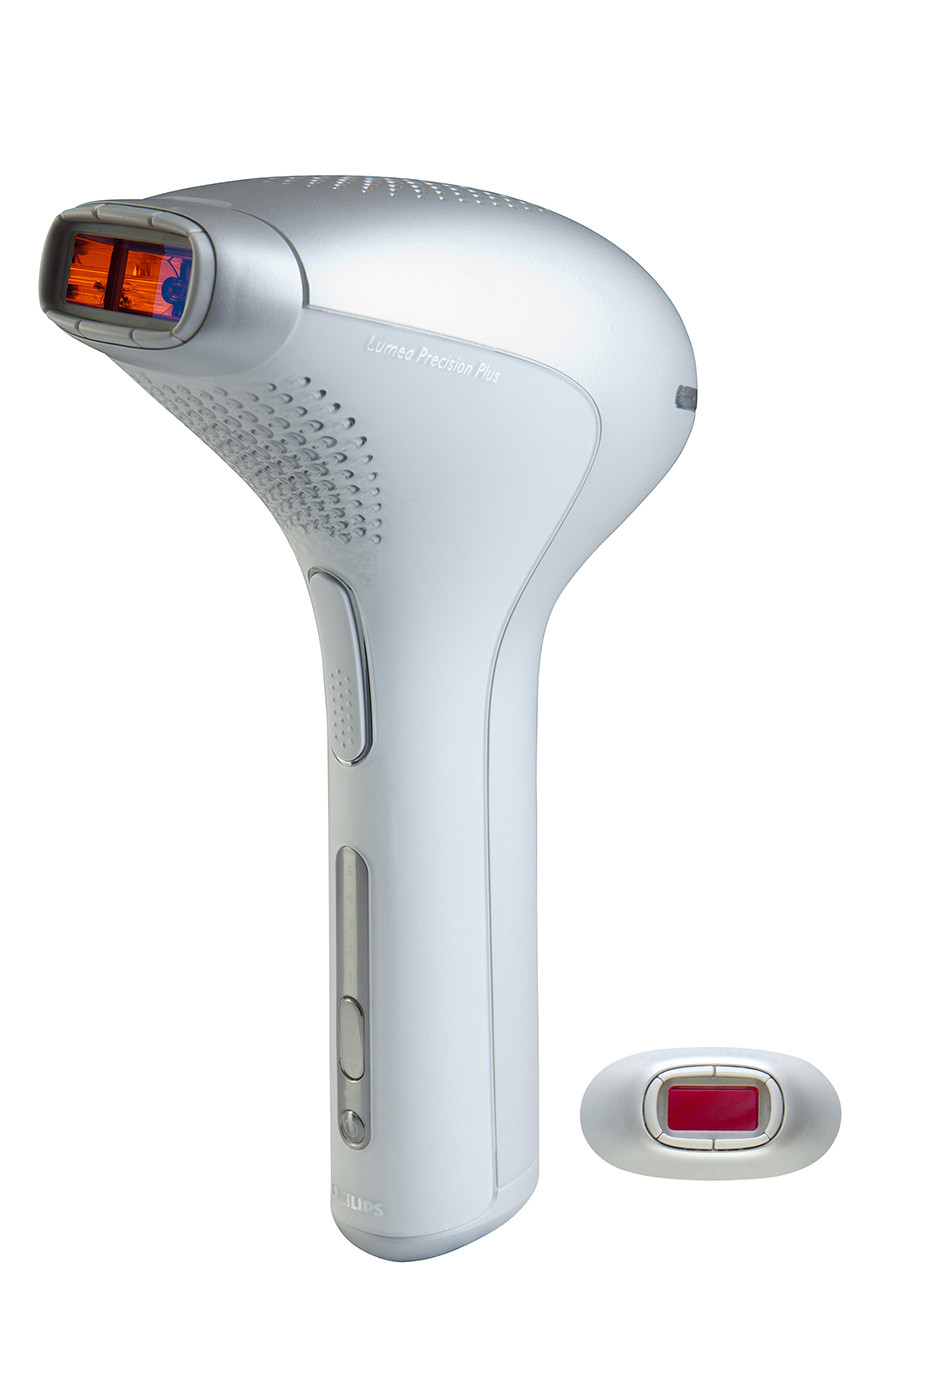 Philips SC2006 11 Lumea Precision Plus IPL Hair Removal System Review